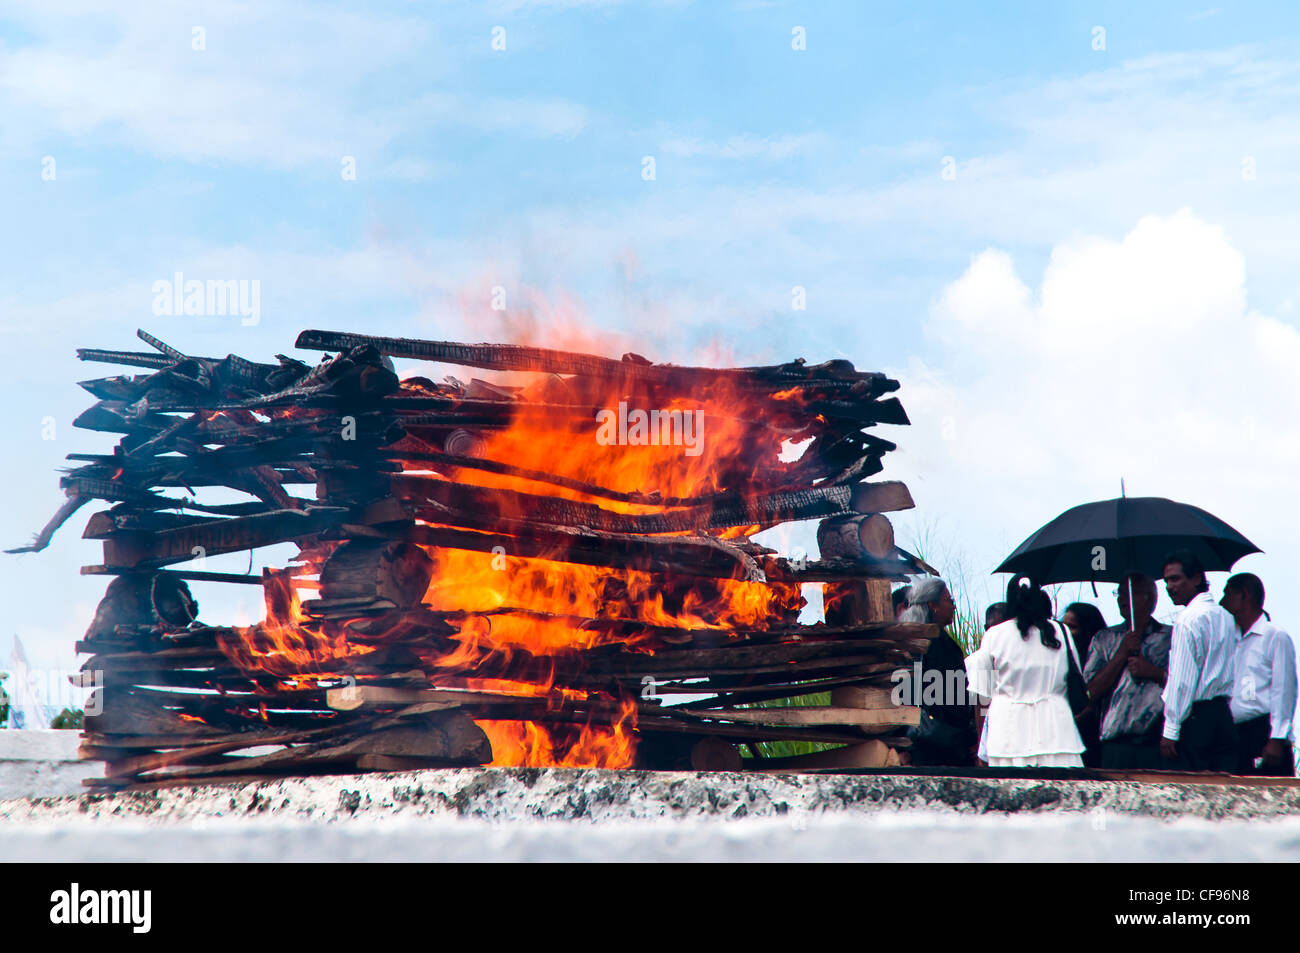 Hindu funeral rights of burning the body on a tall wooden funeral pyre sometimes take place on the beaches near San Fernando. Stock Photo